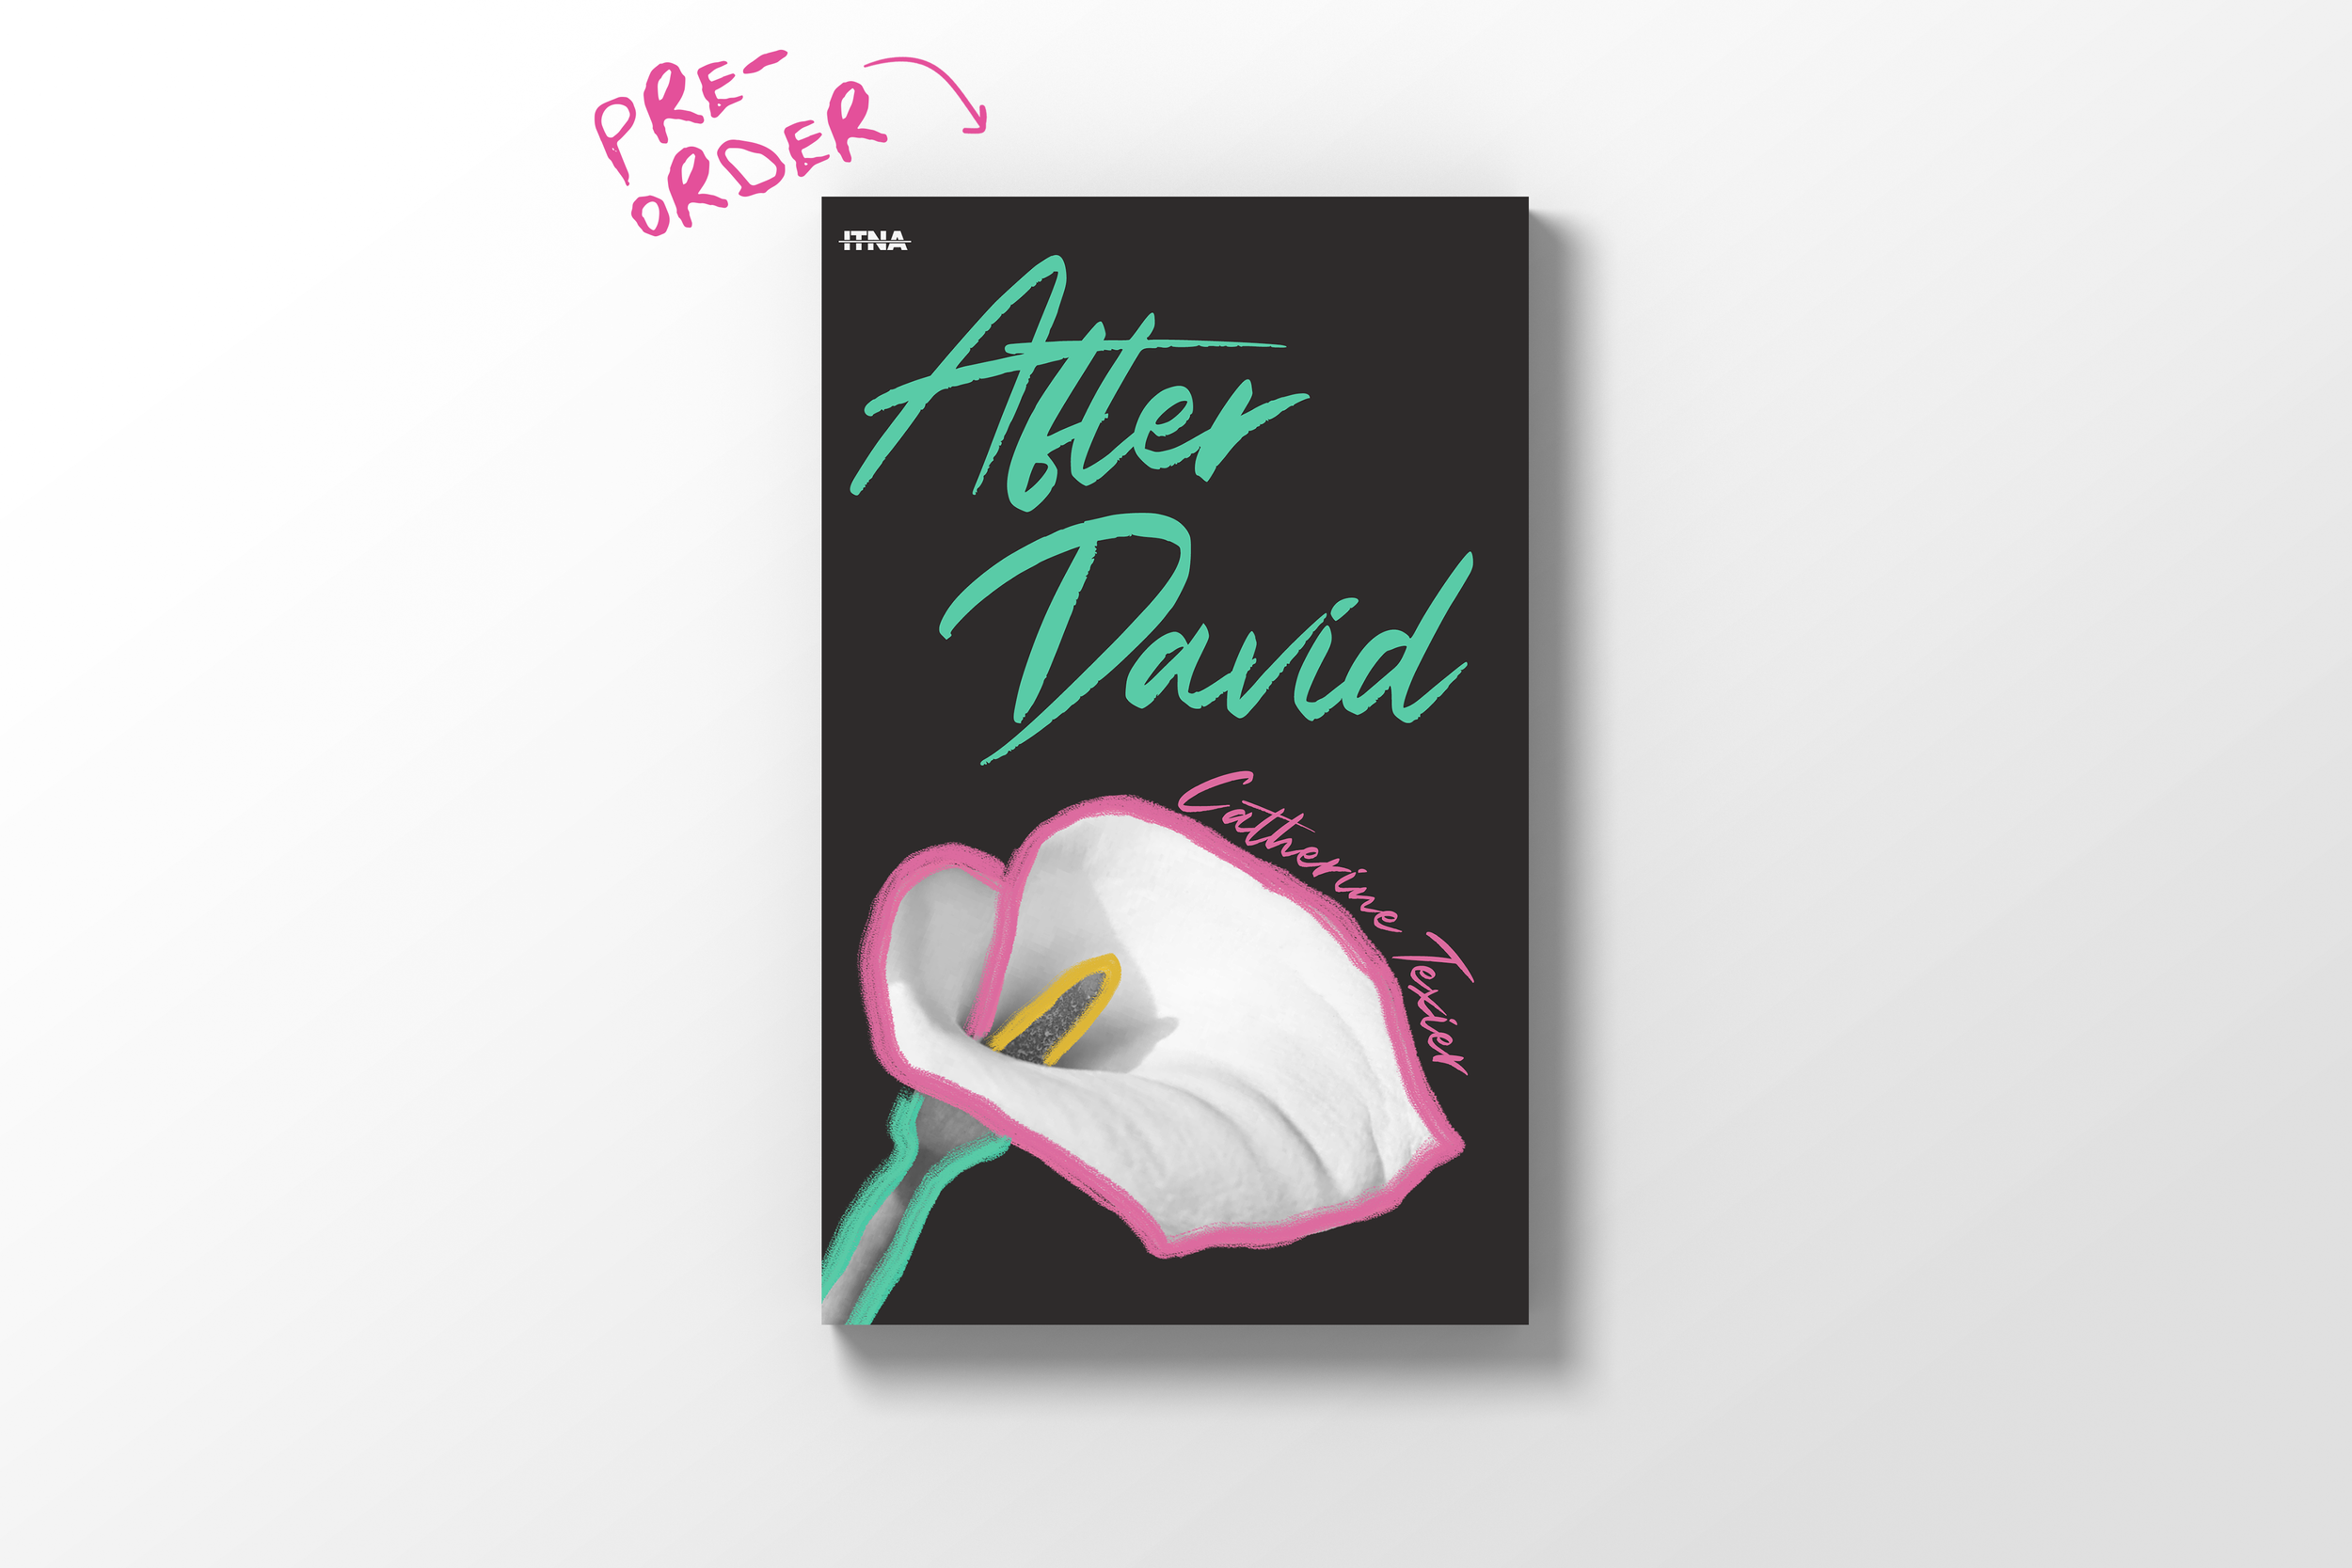 AFTER DAVID | Catherine Texier